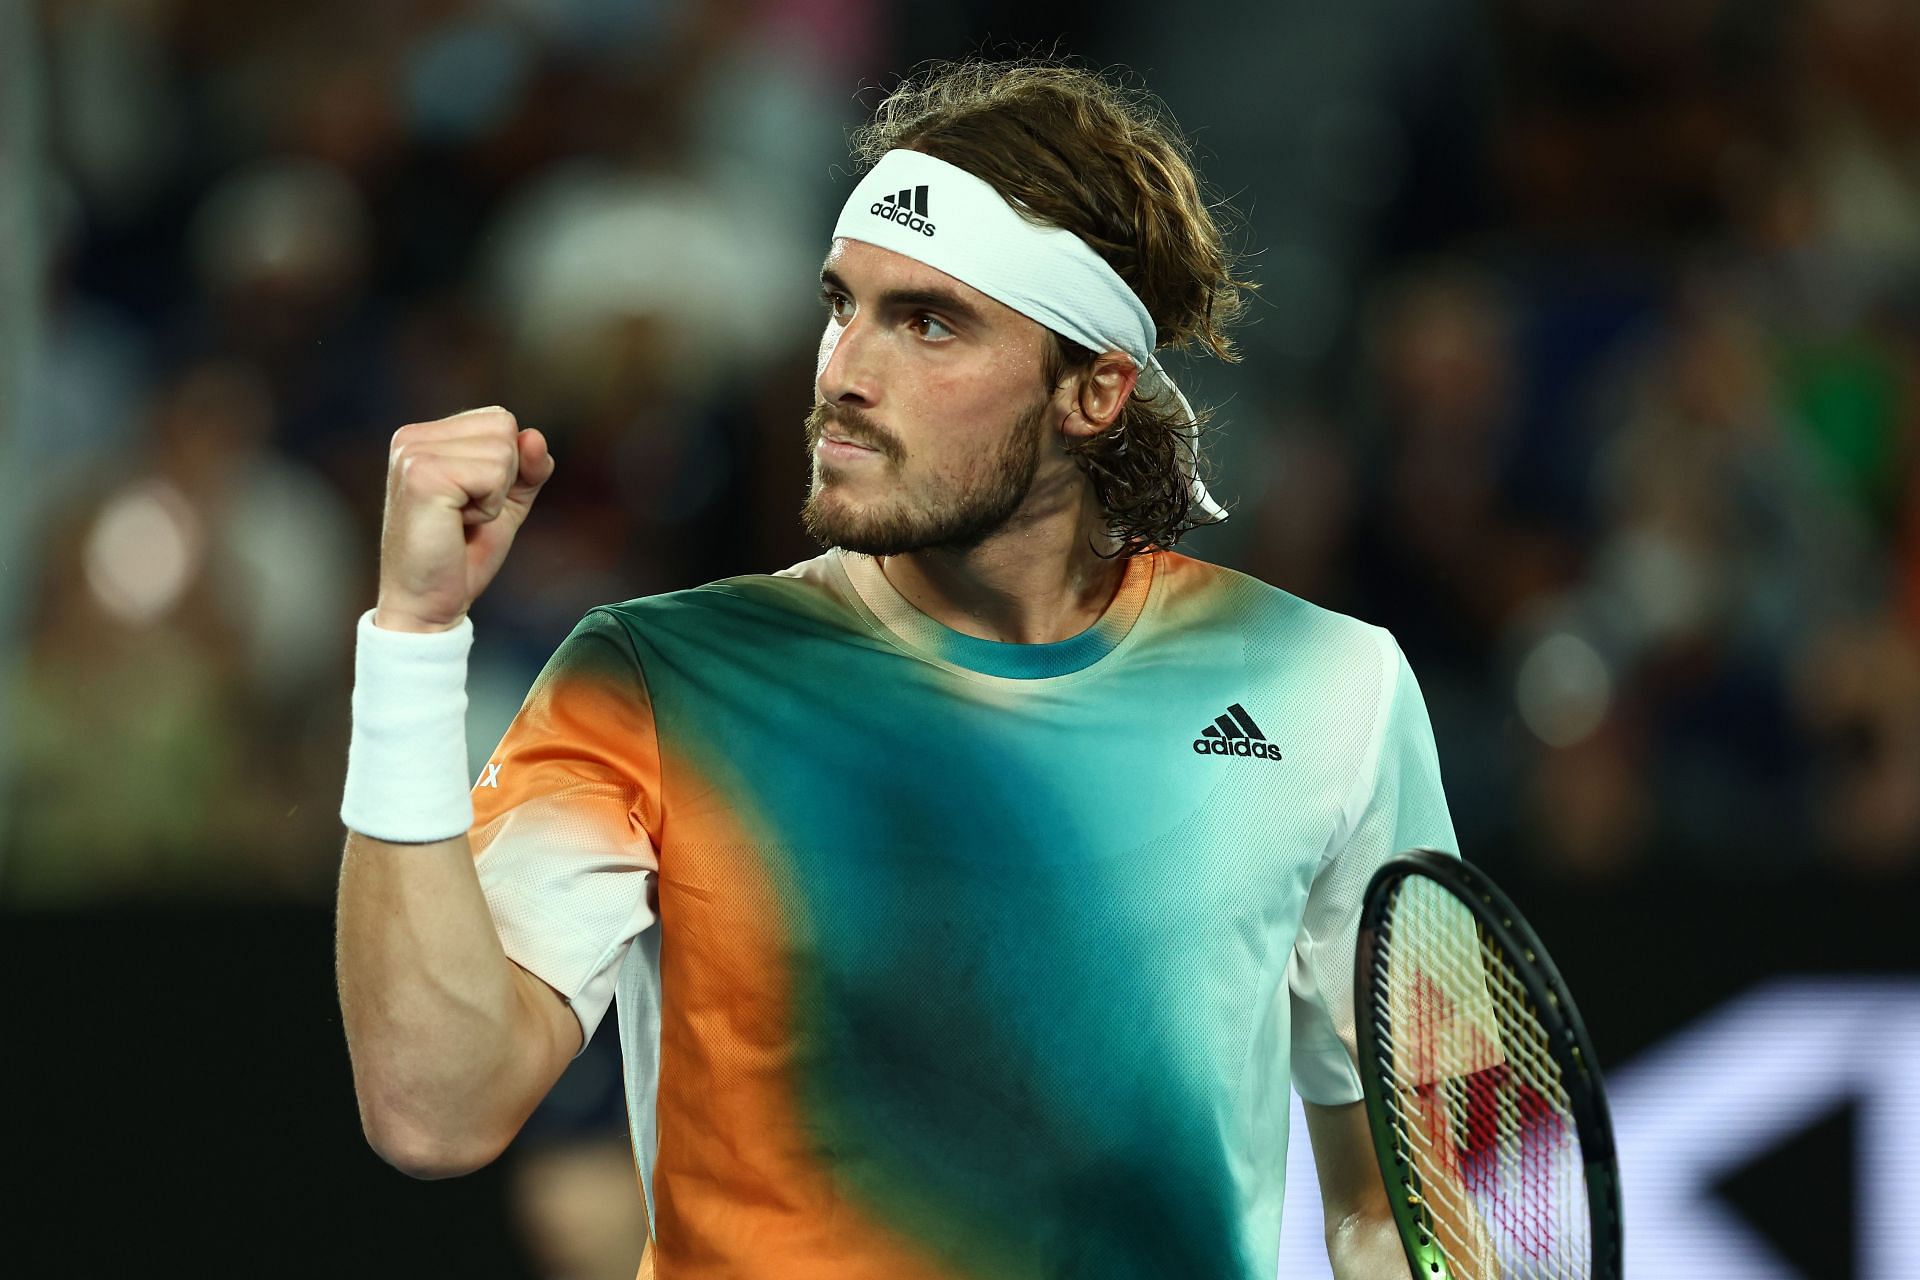 Stefanos Tsitsipas hoped he could pull off a tweener winner in a competitive tennis match